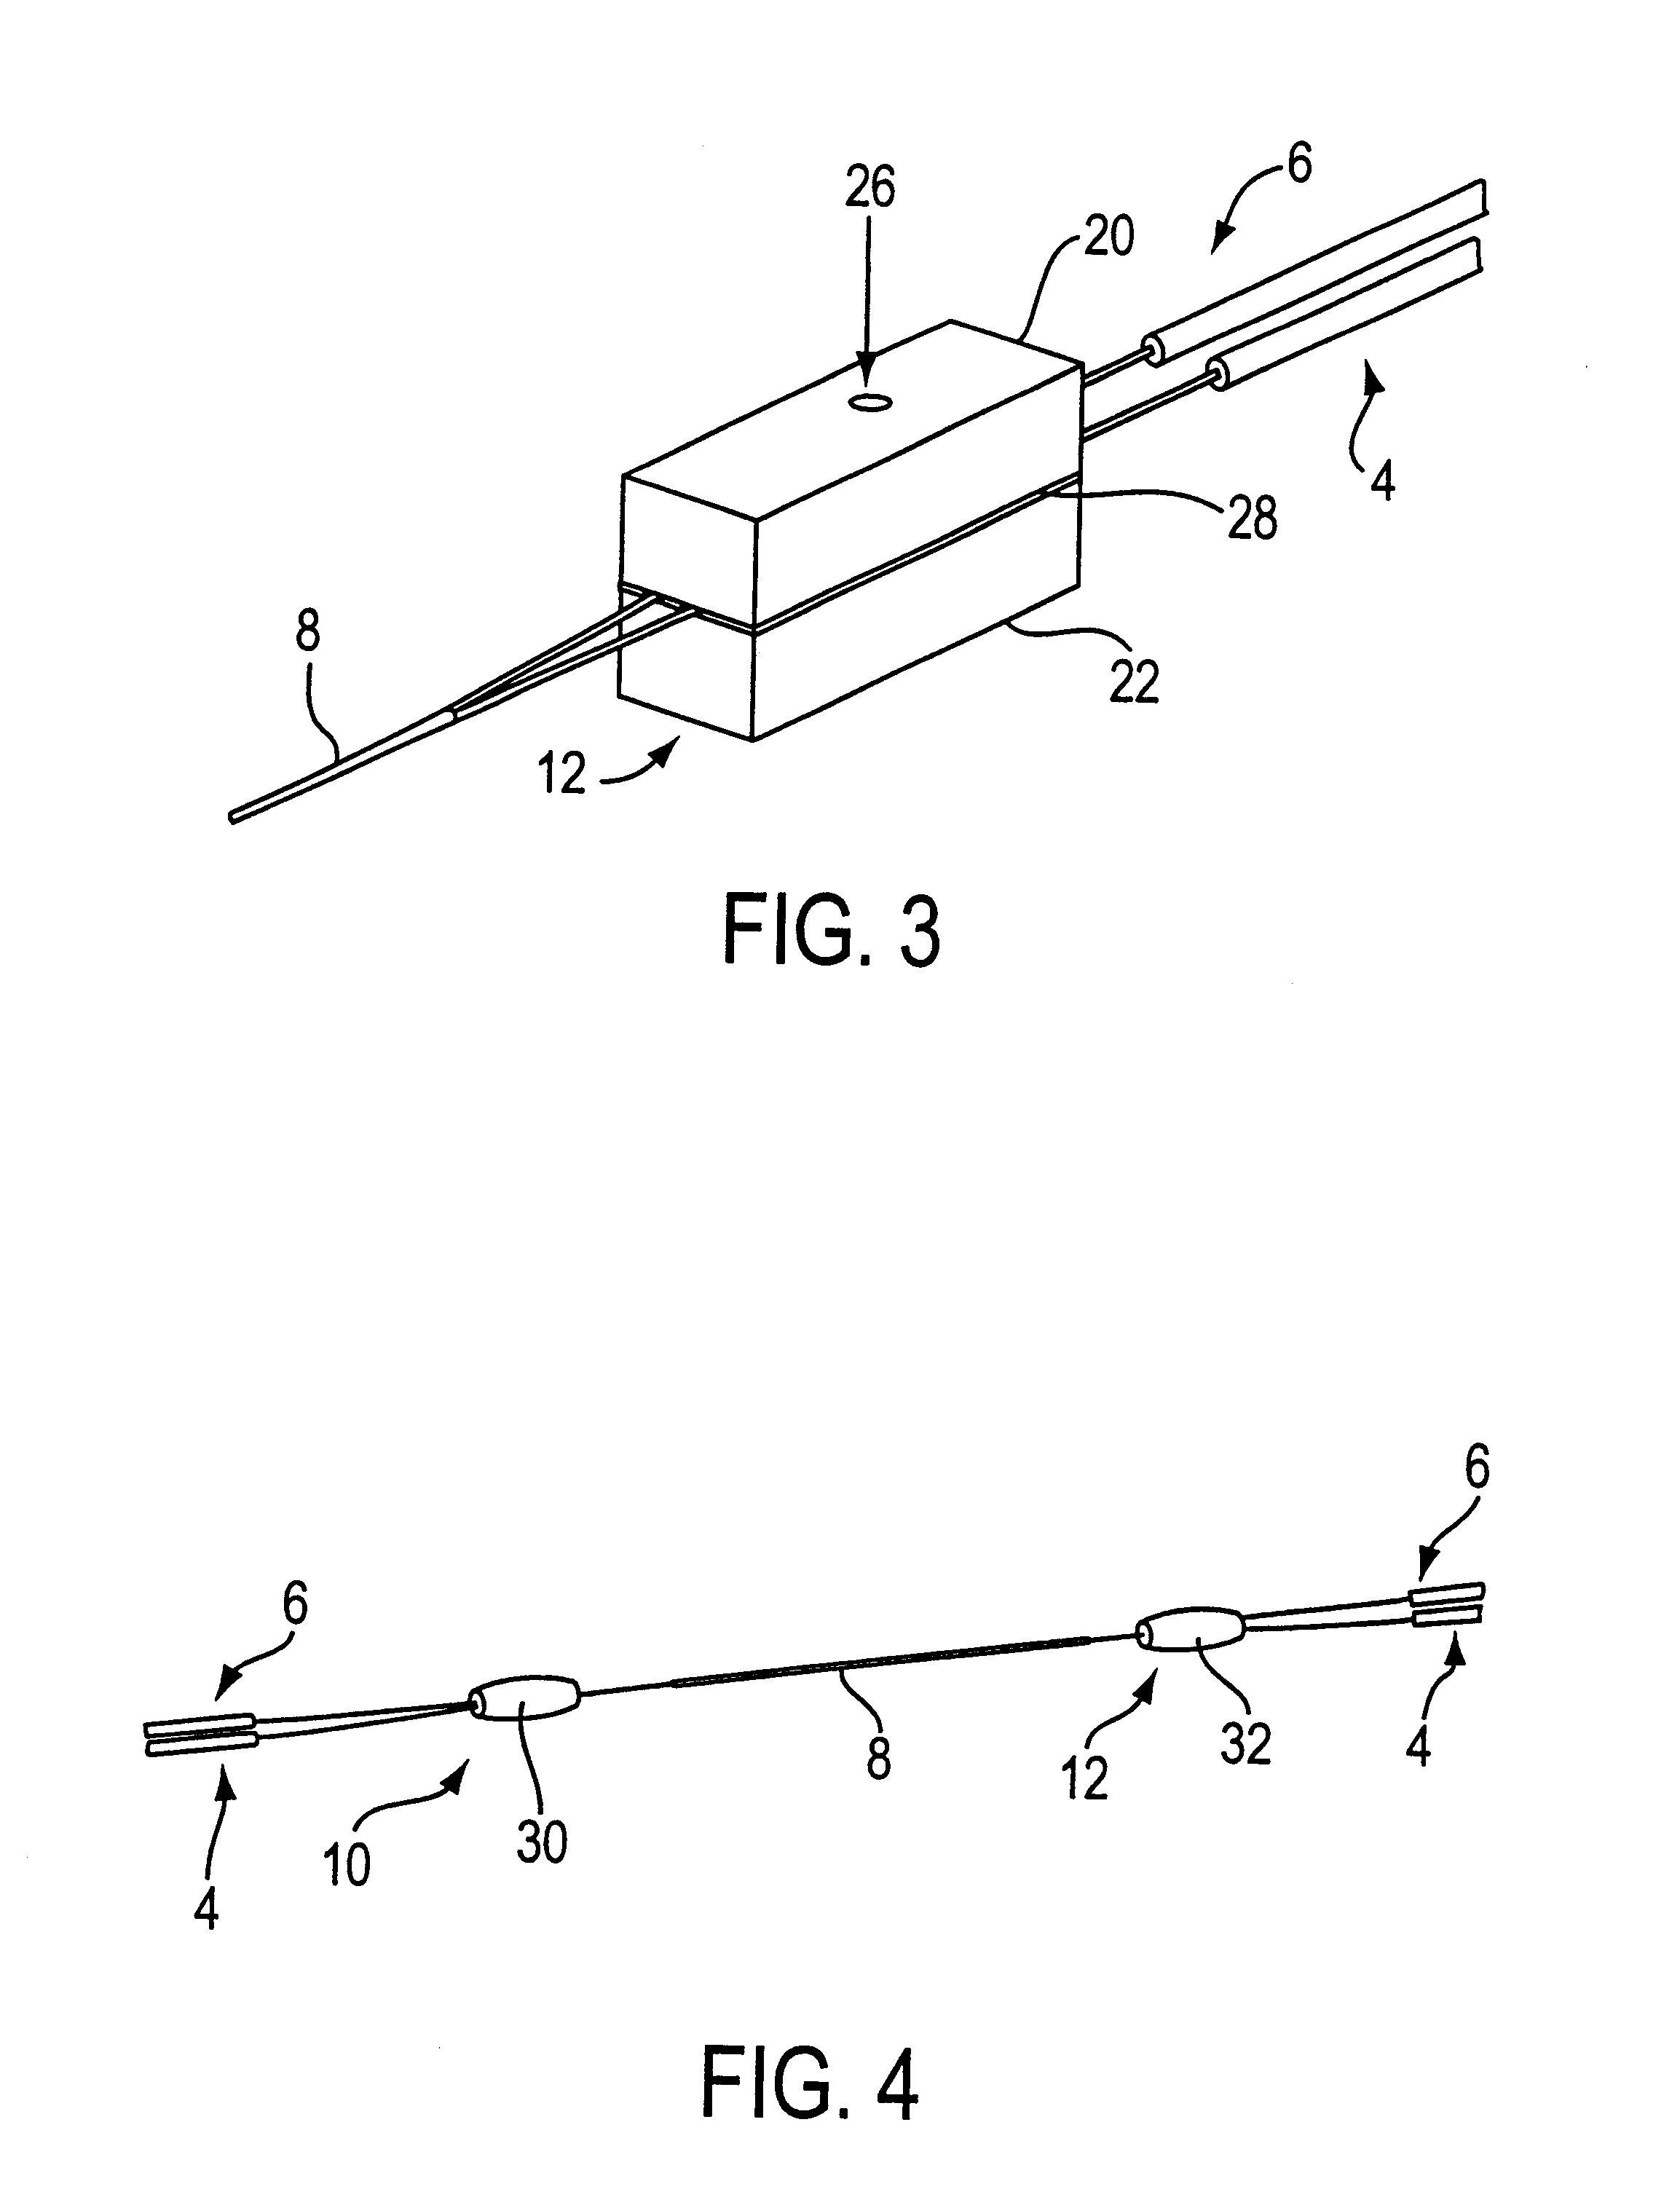 Apparatus and method bonding optical fiber and/or device to external element using compliant material interface